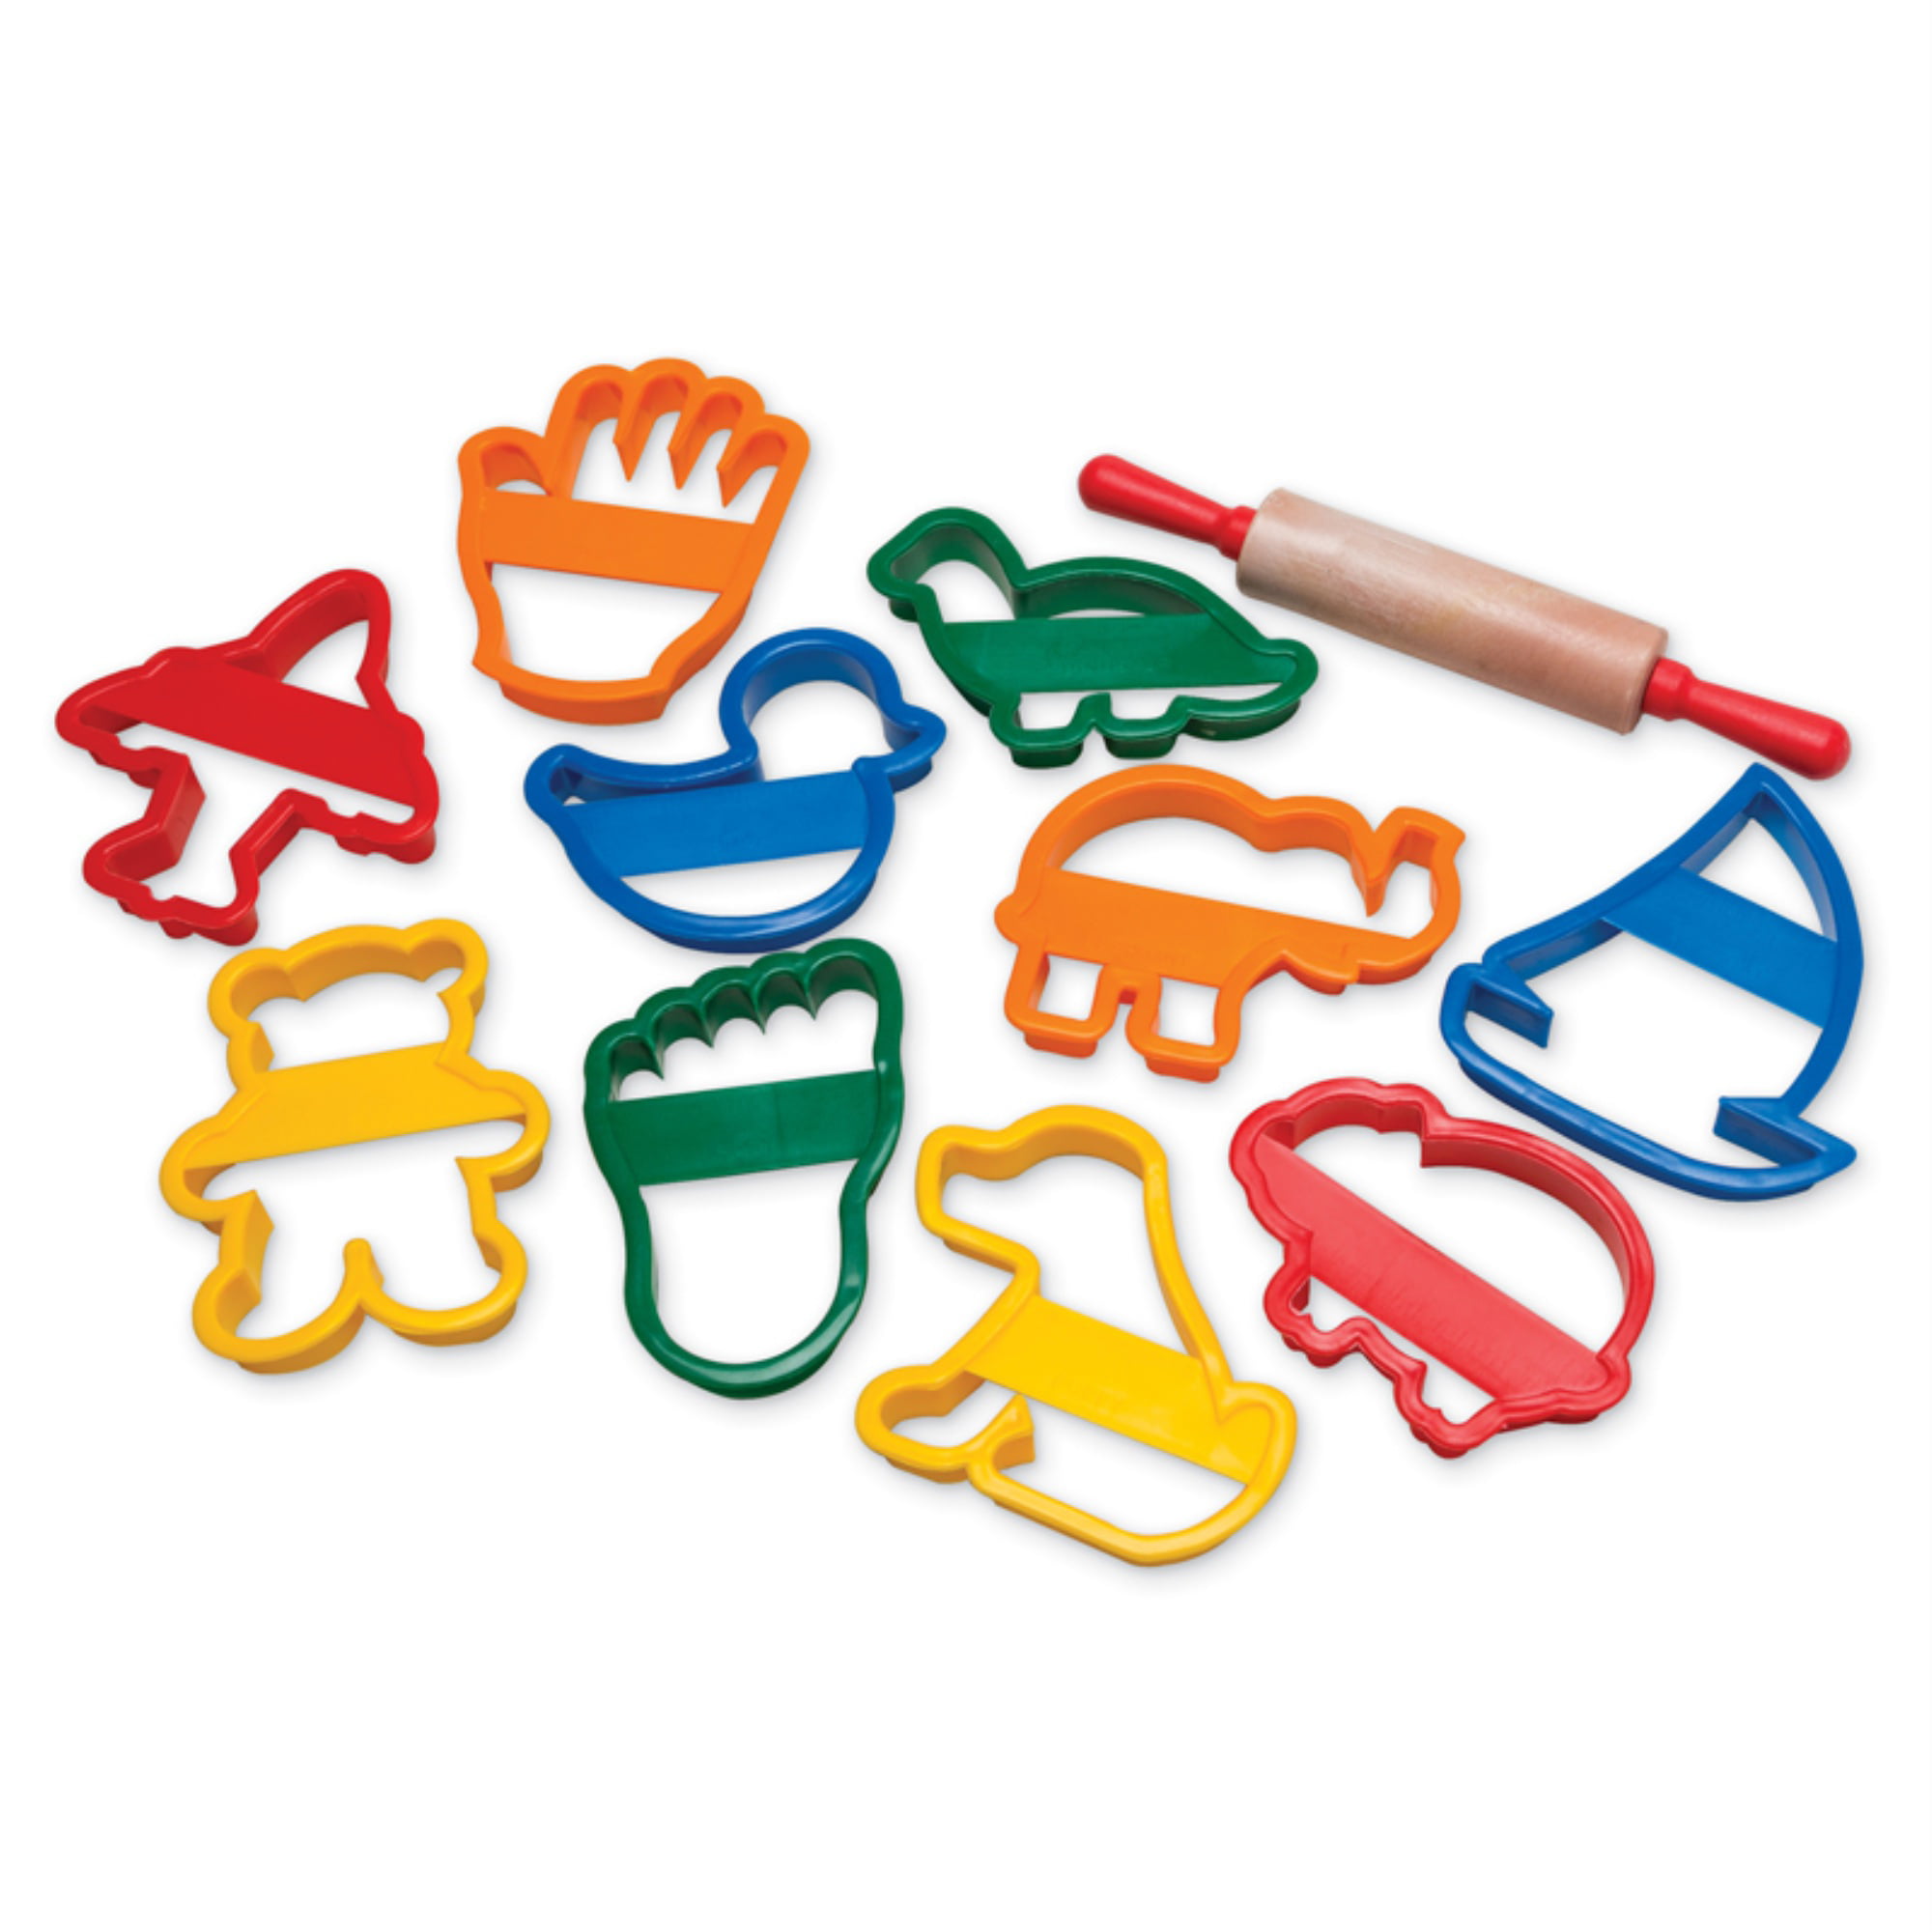 Dough Kids Tools Play Set Modelling Doh Clay Craft Rolling Pins Cookie Cutters 